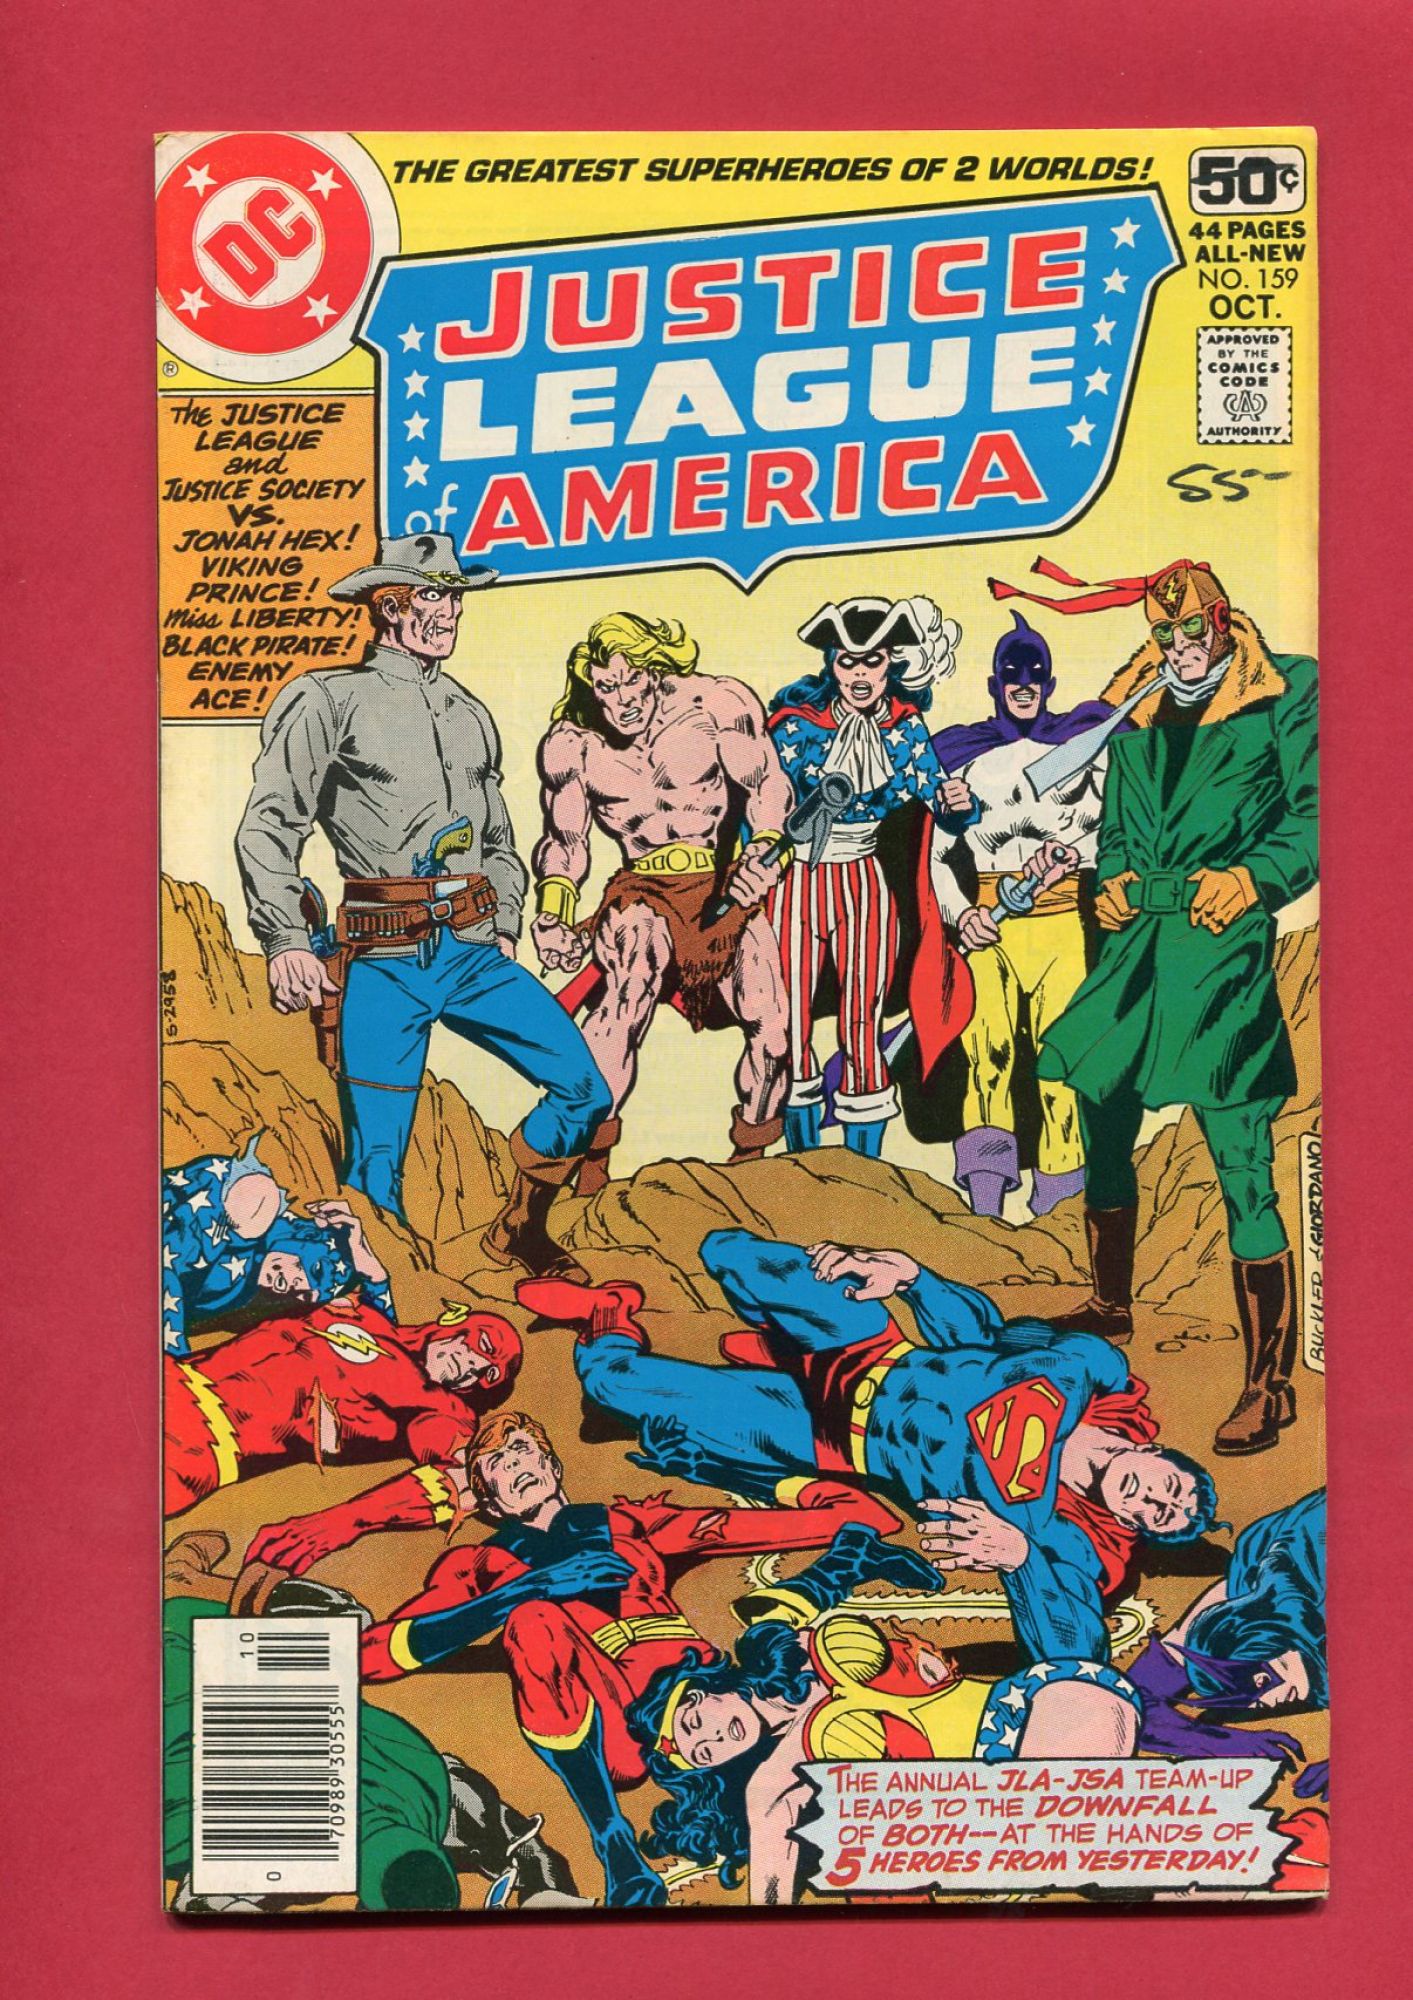 Justice League of America #159, Oct 1978, 7.5 VF-